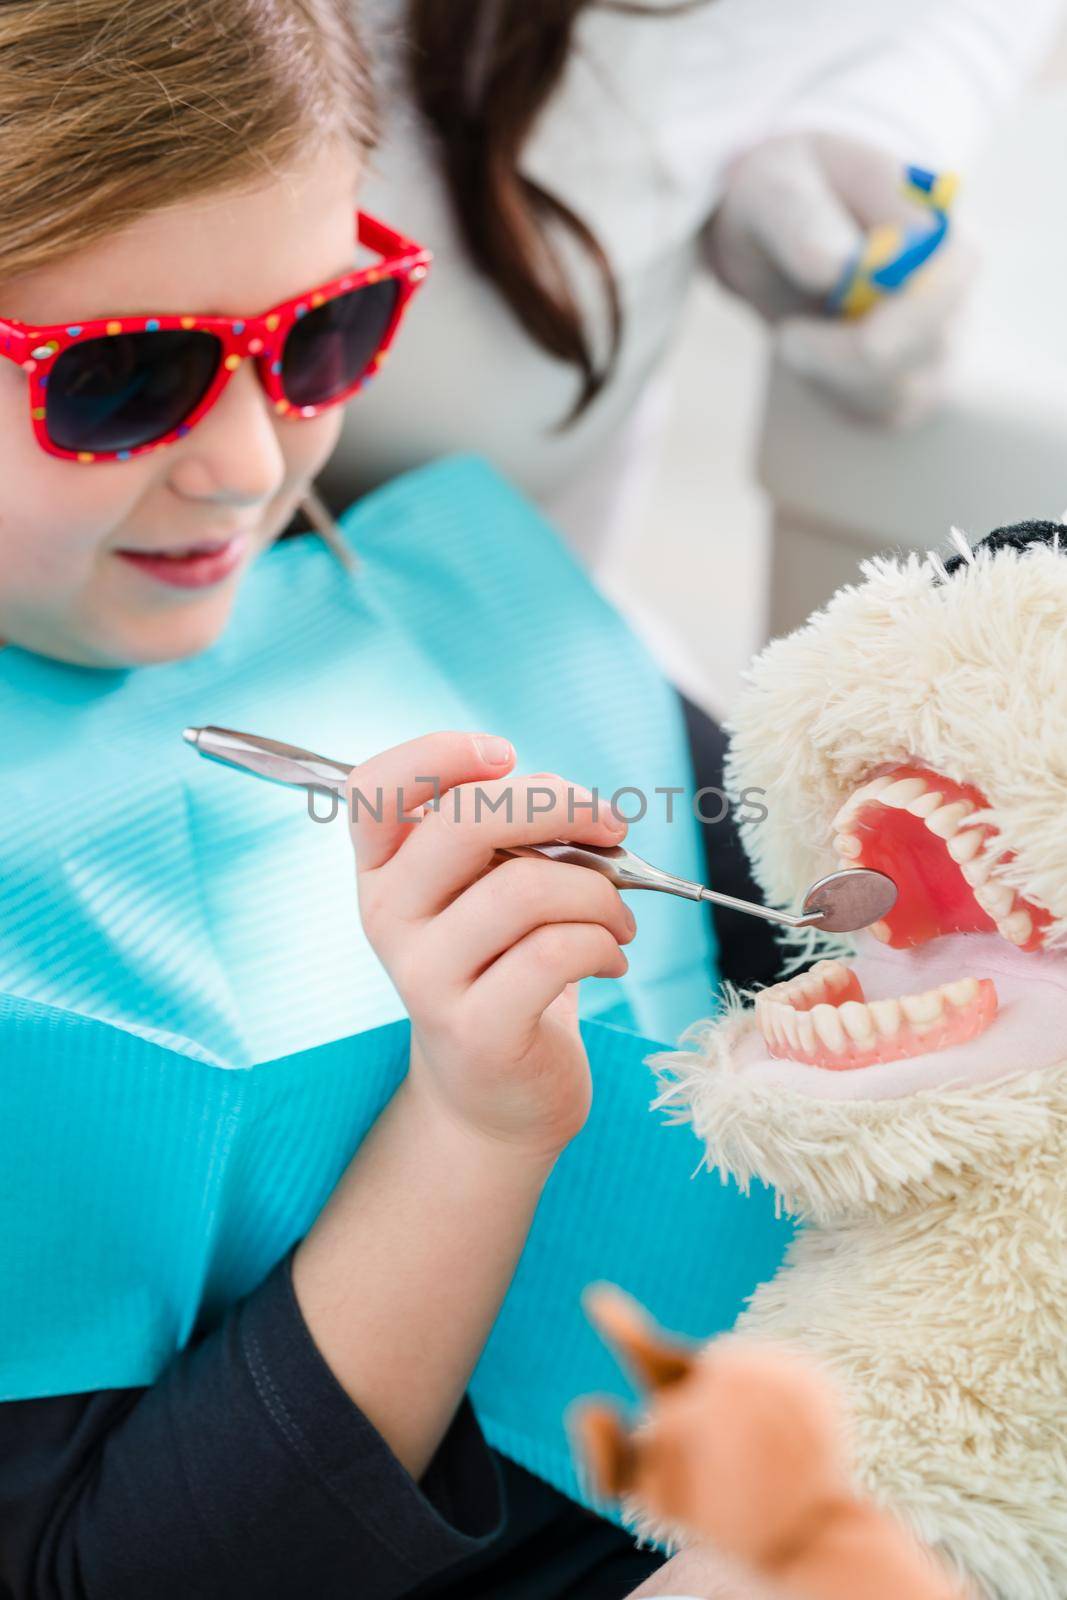 Child at dentist office looking after teeth of pet toy by Kzenon